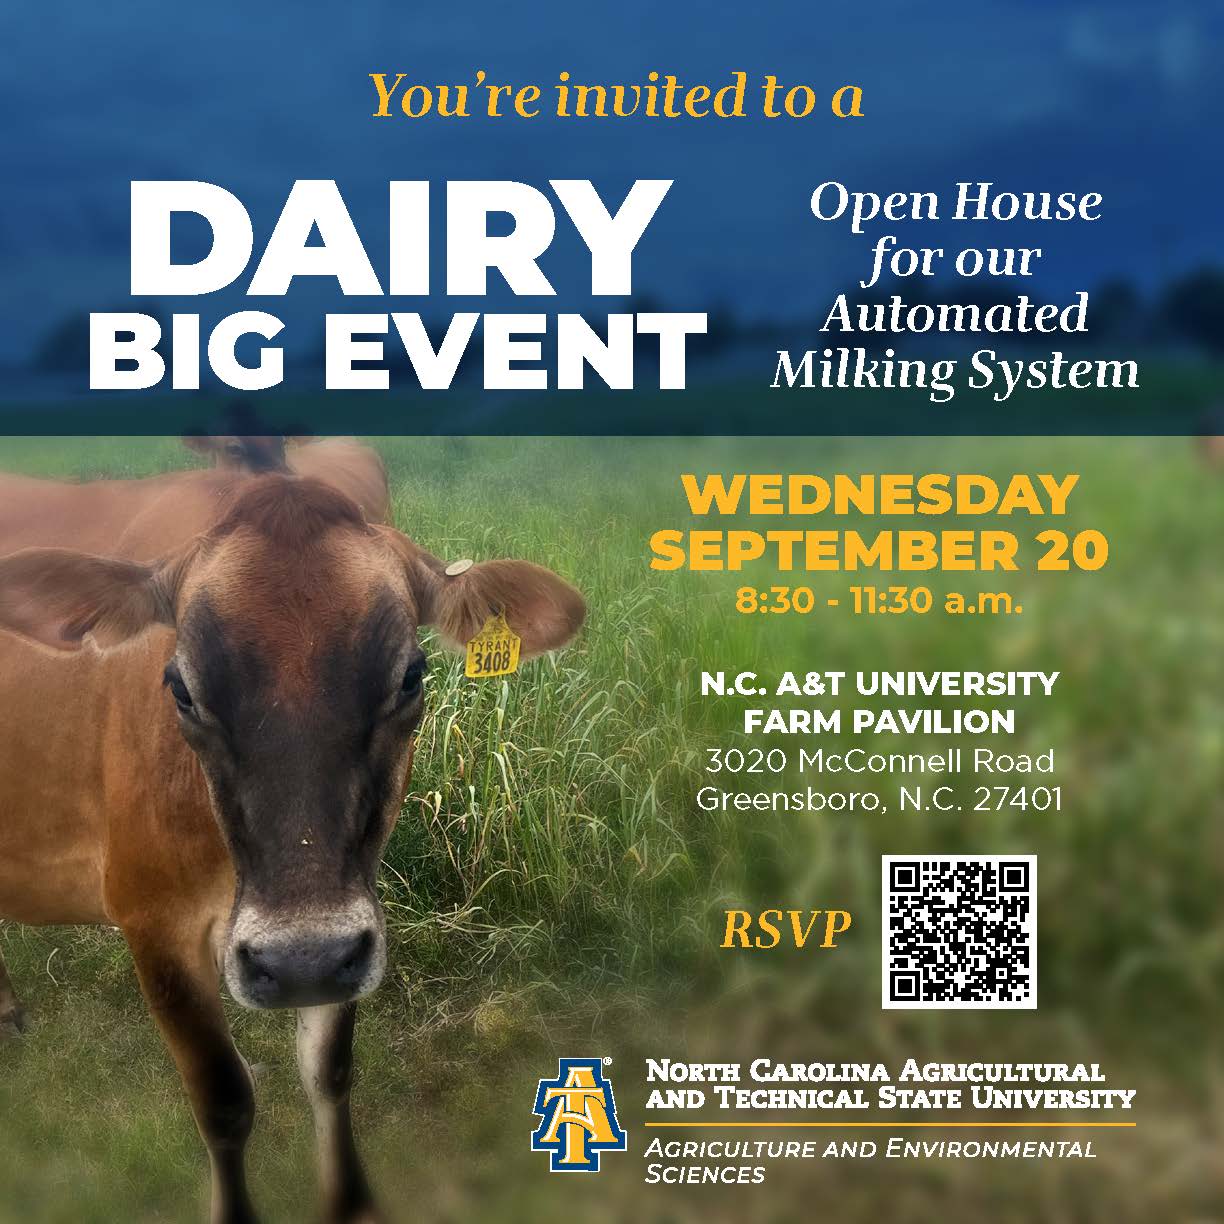 Automated Milking System flyer with QR code for registration